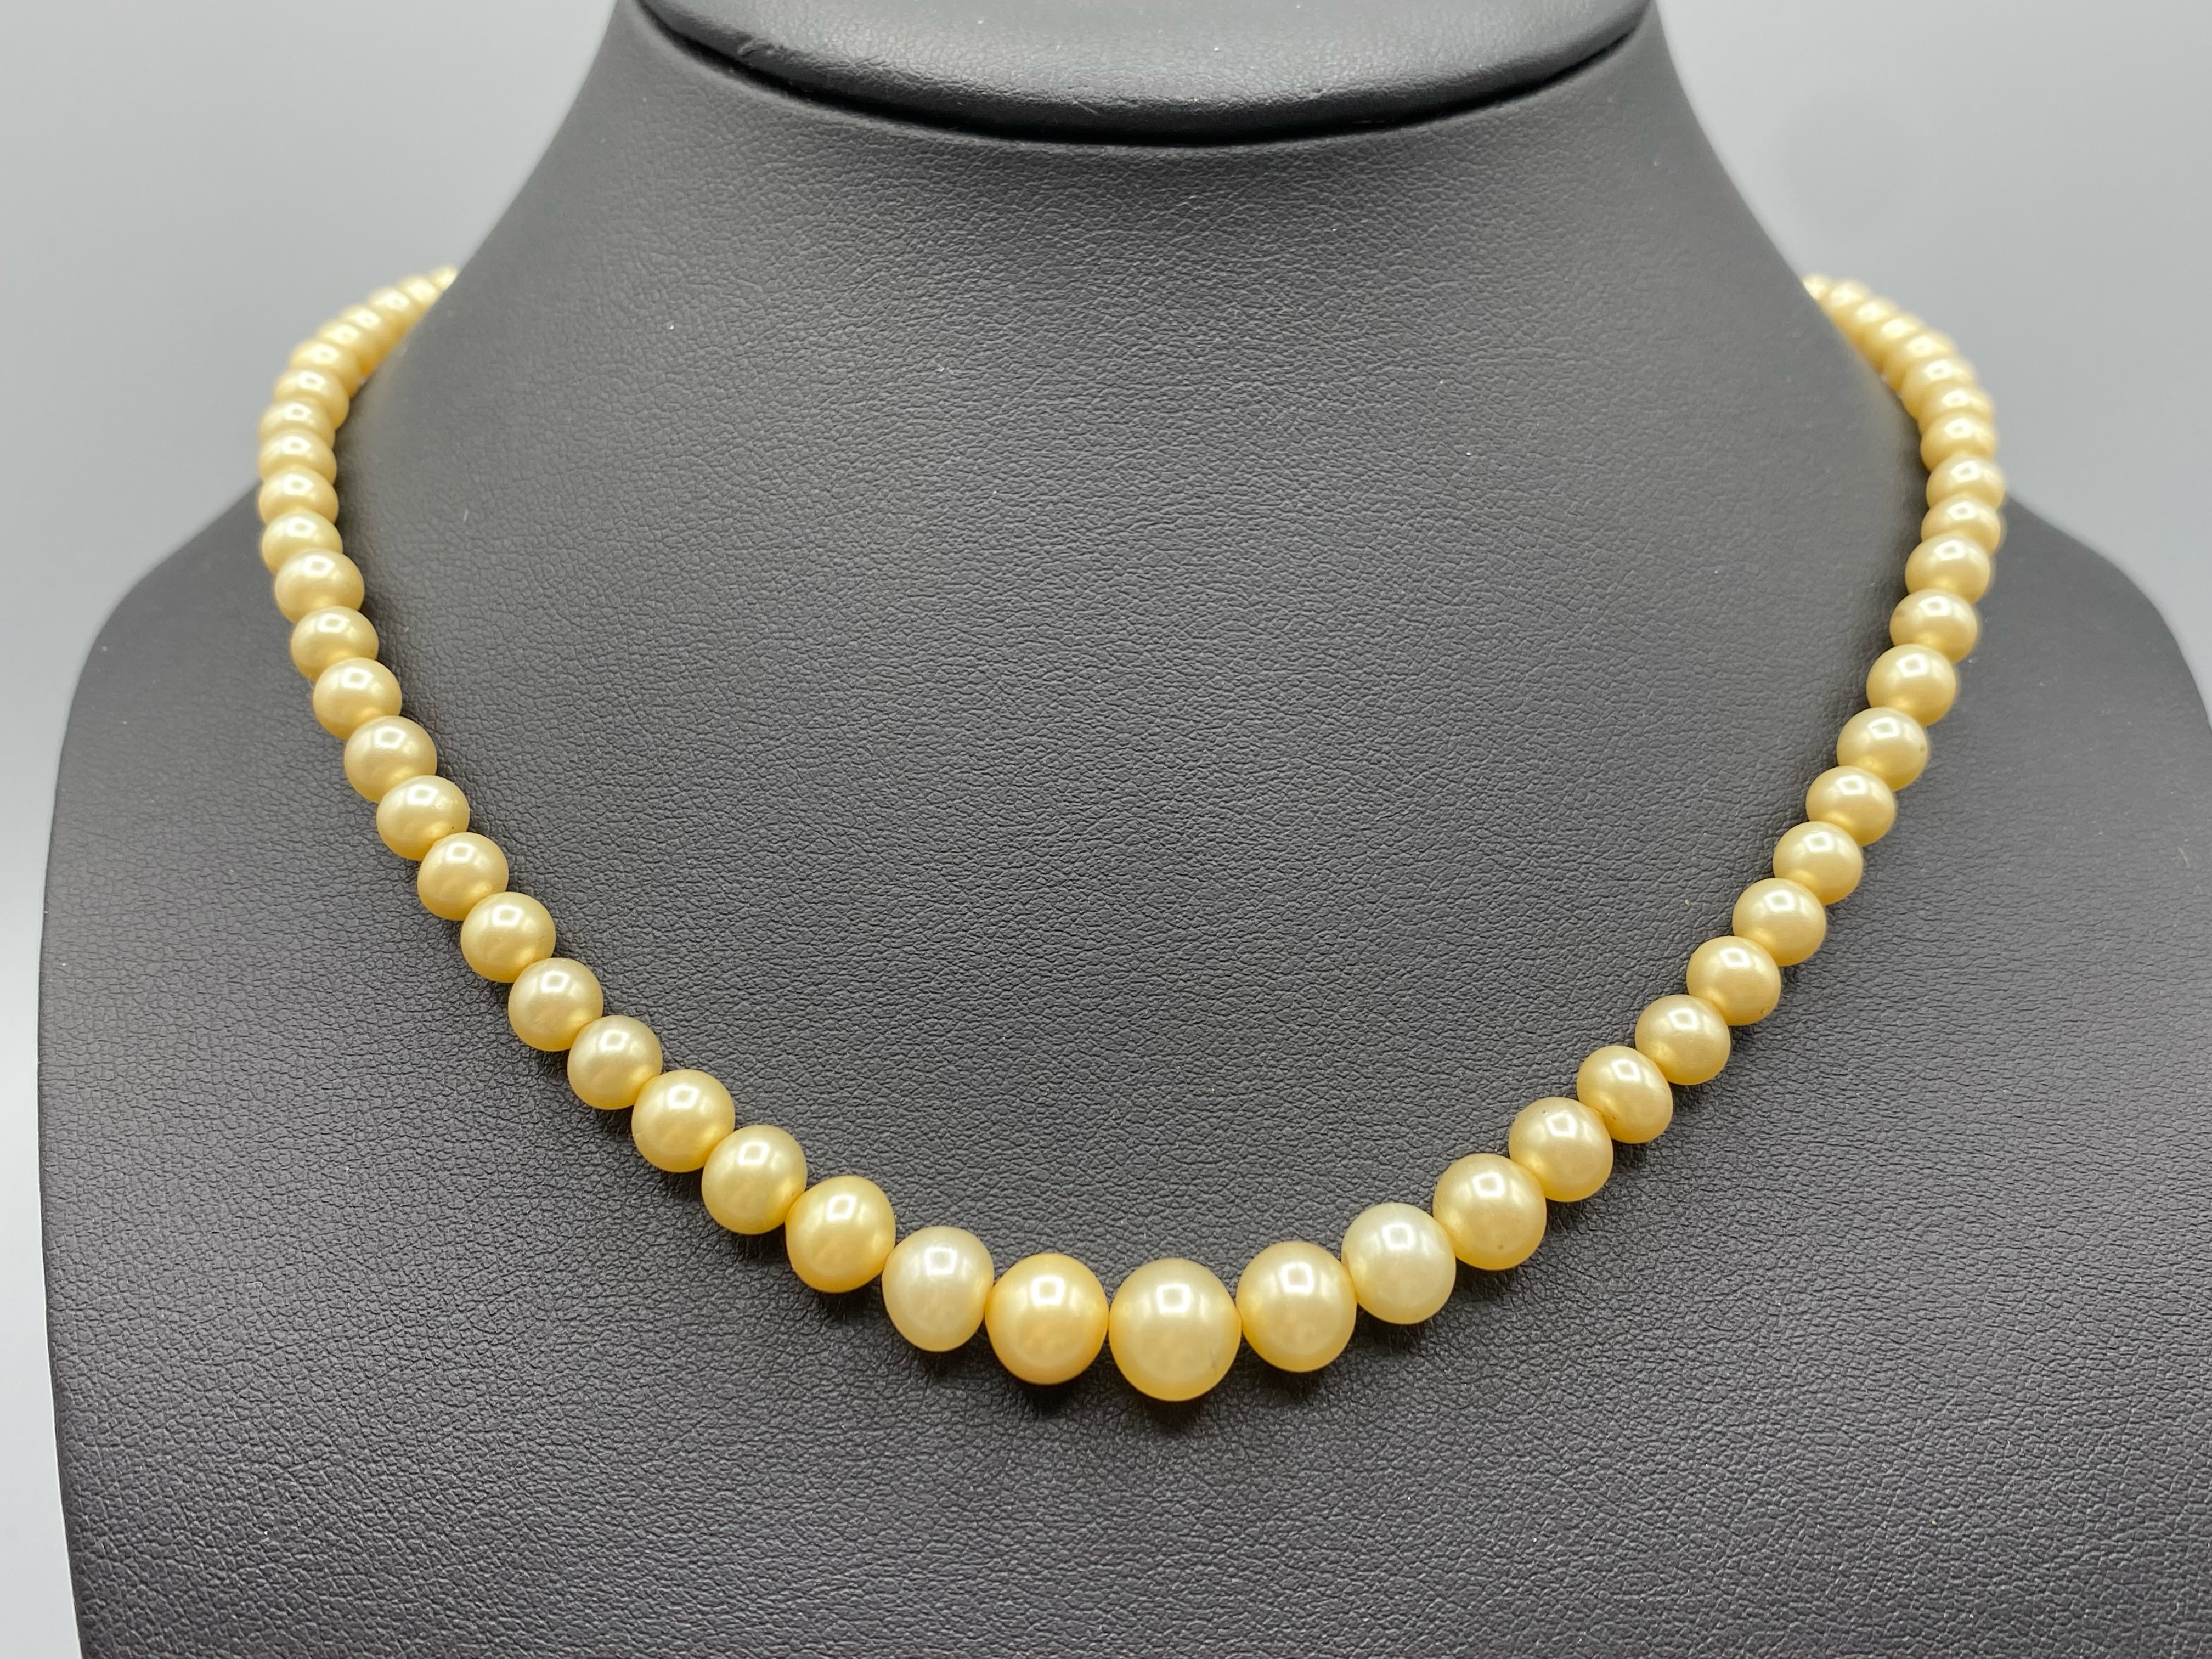 Antique Edwardian Pearl Necklace with 9ct Gold Clasp 63cm in length - Image 3 of 4